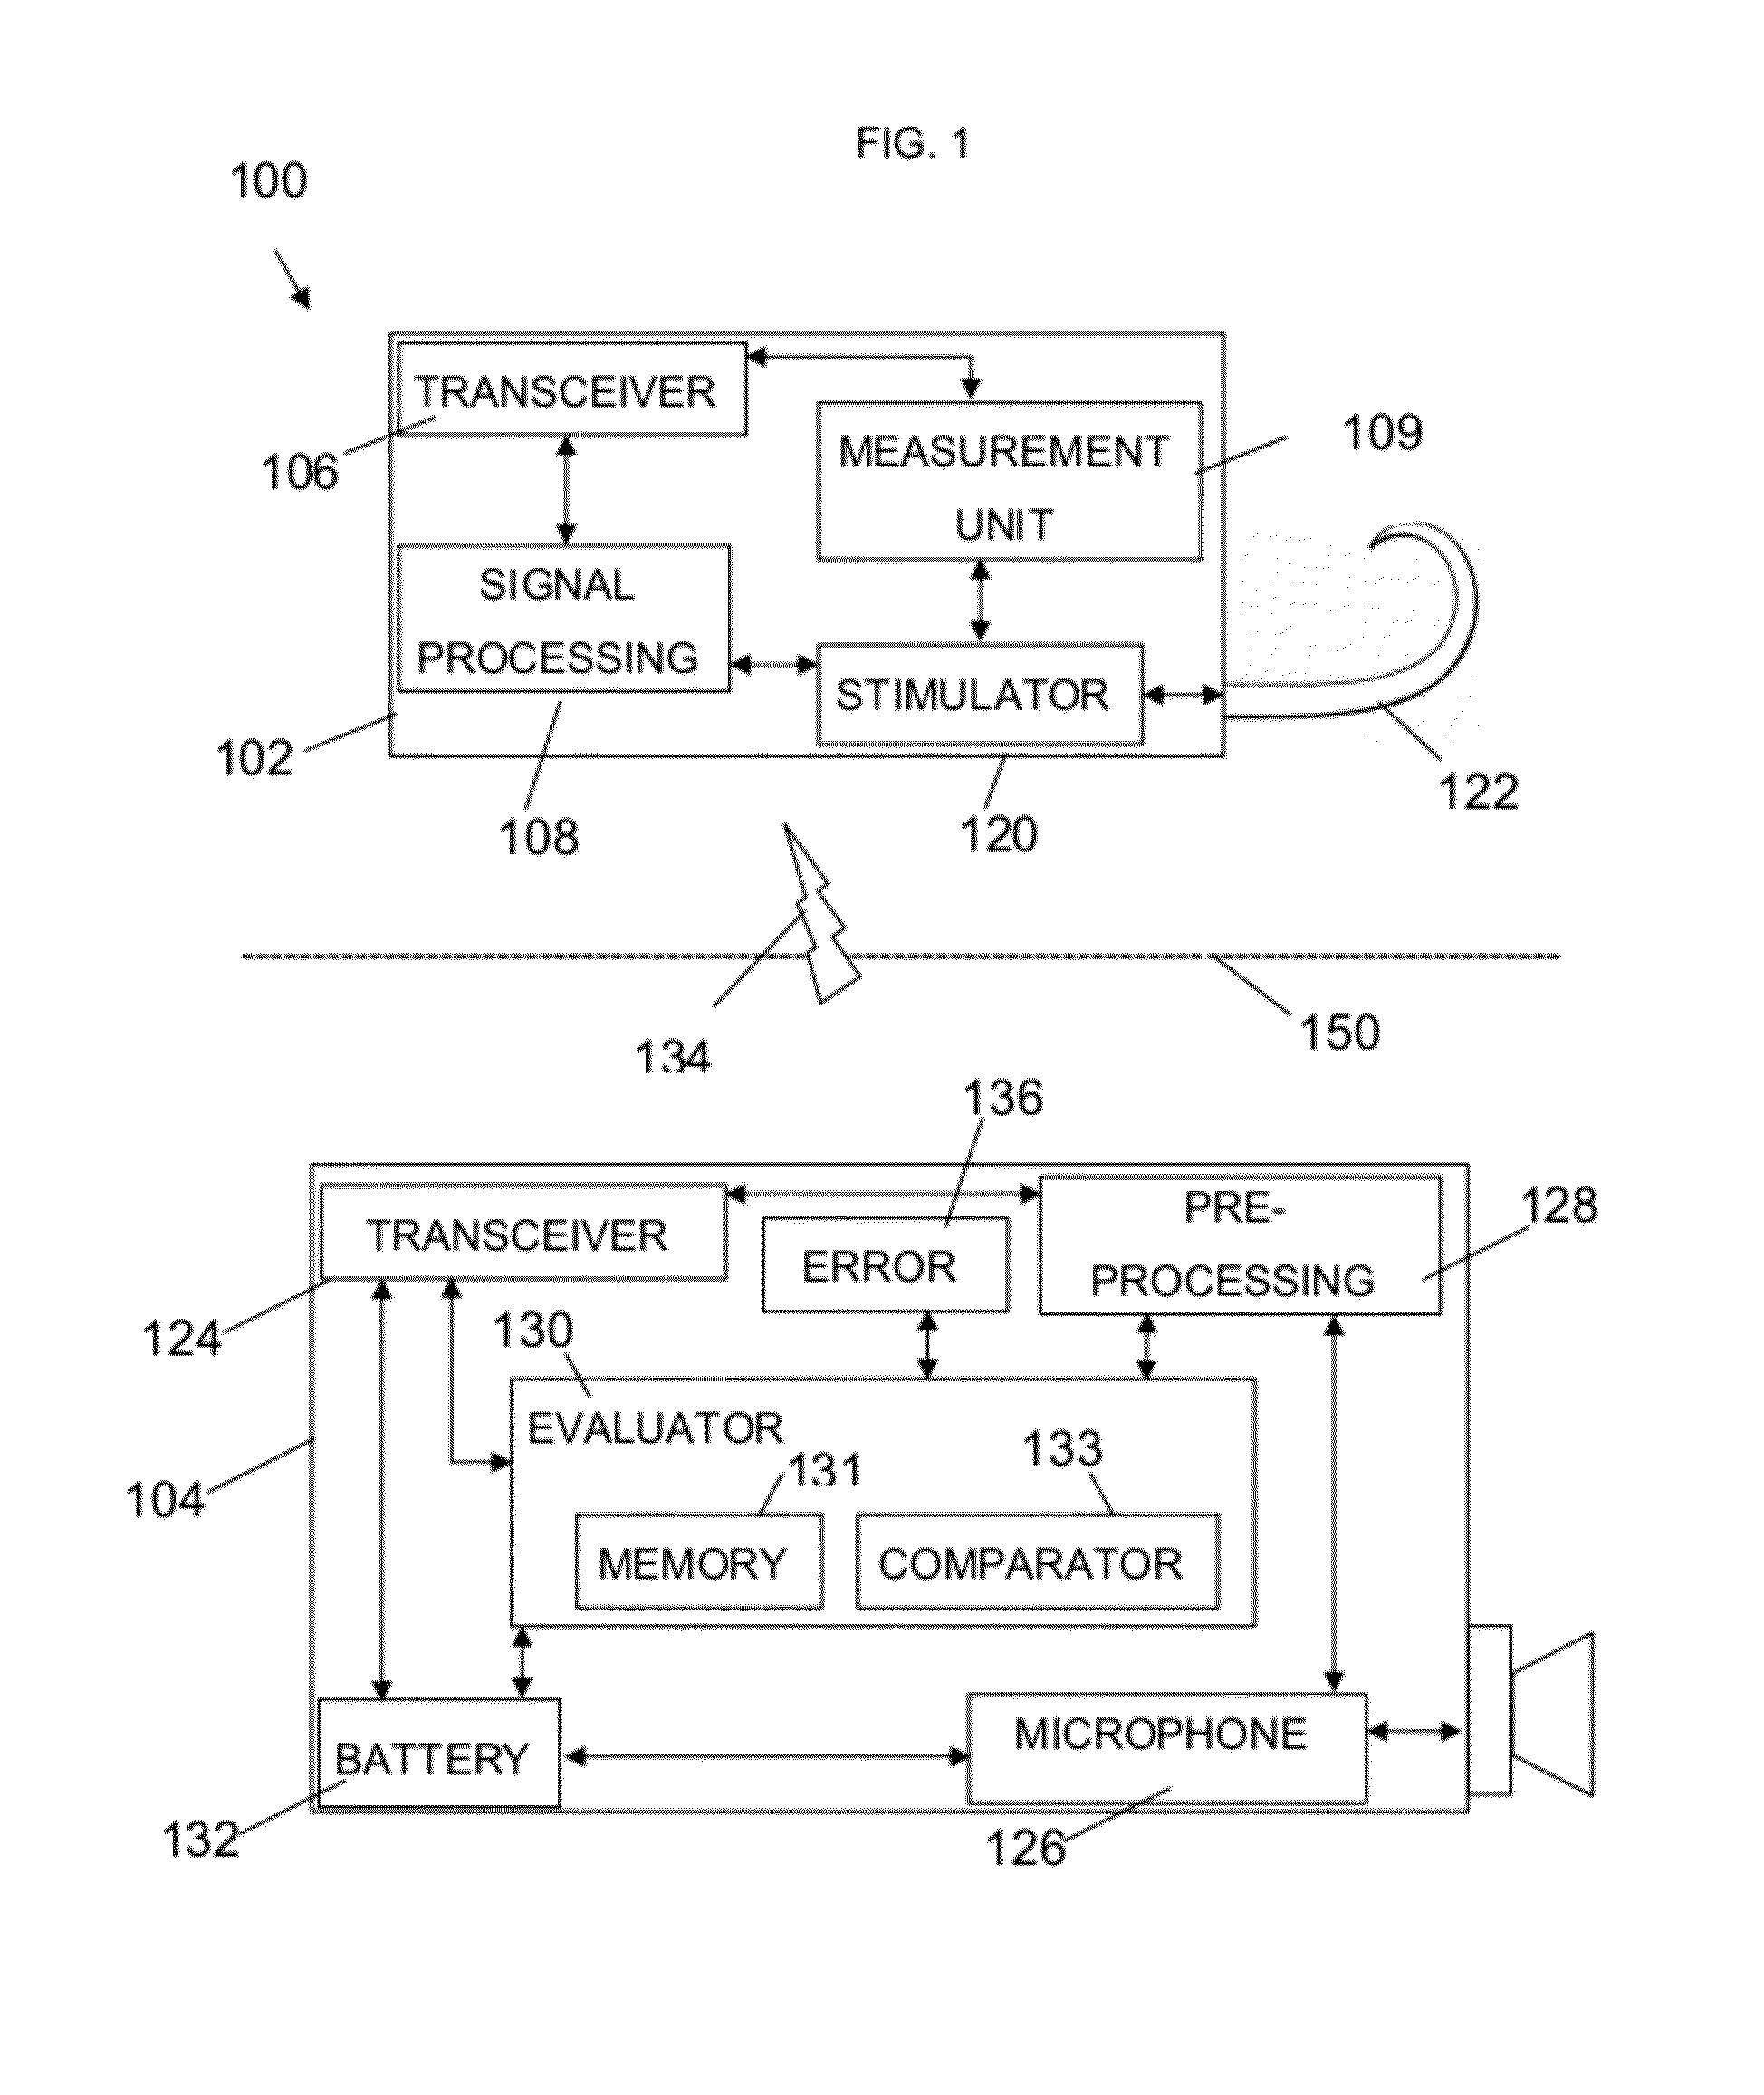 Integrity evaluation system in an implantable hearing prosthesis